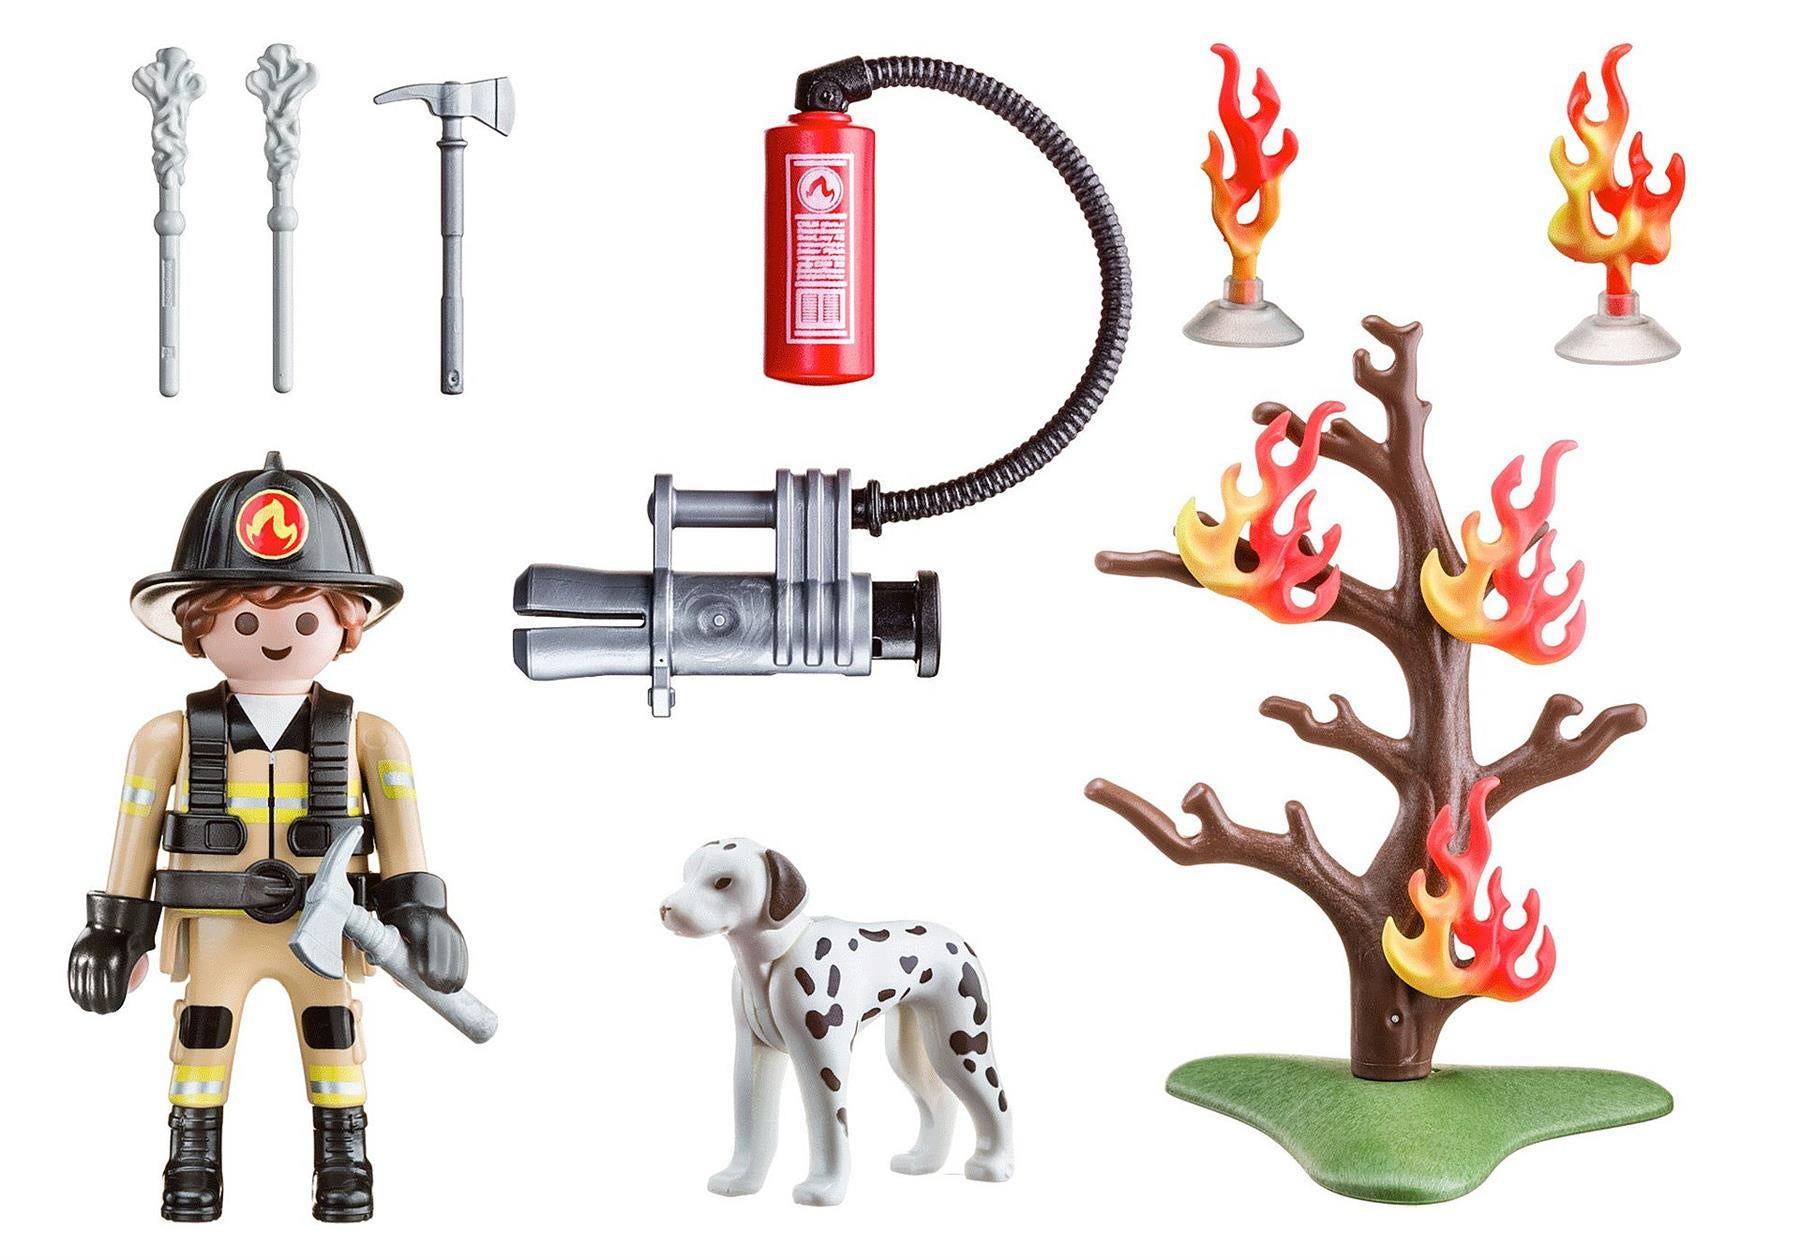 Playmobil City Action 70310 Fire Rescue Carry Case